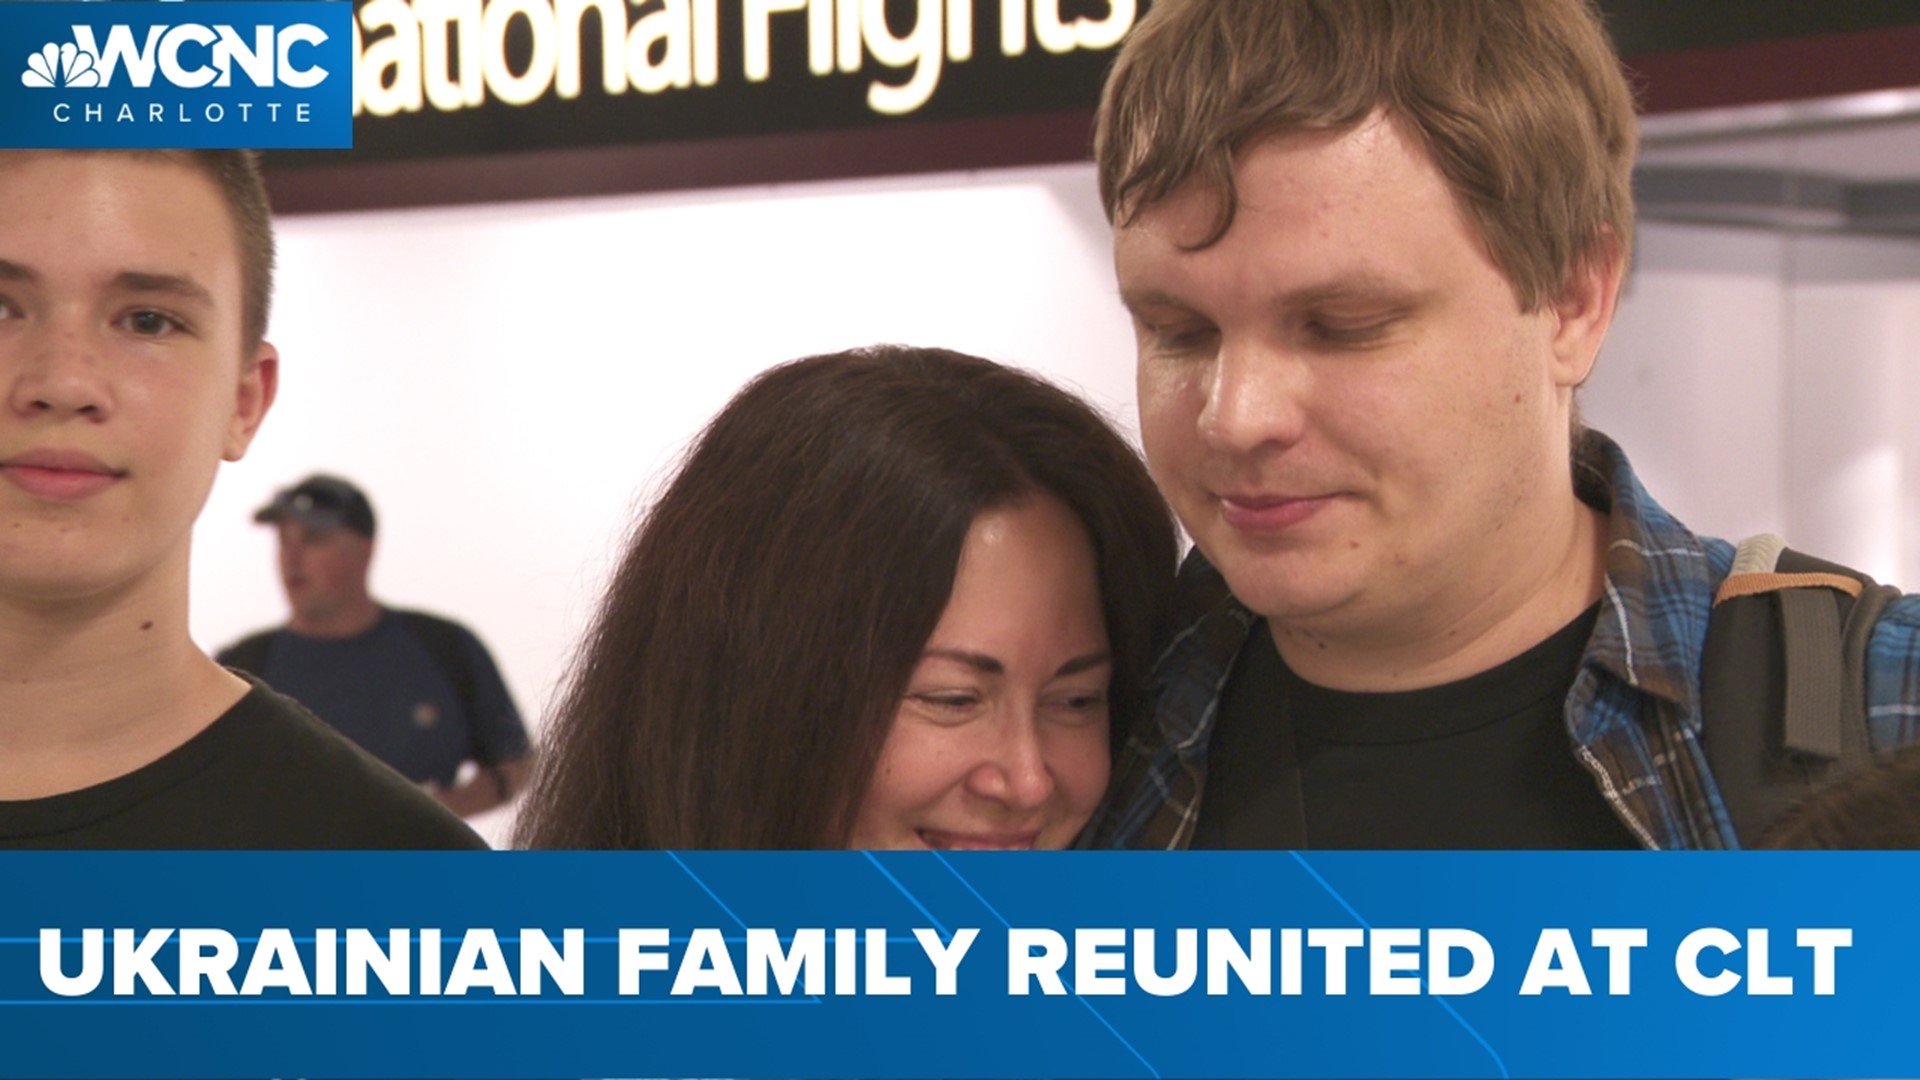 A Ukrainian family who now lives in North Carolina after fleeing their war-torn homeland is finally reunited with the father and husband who had to stay behind.